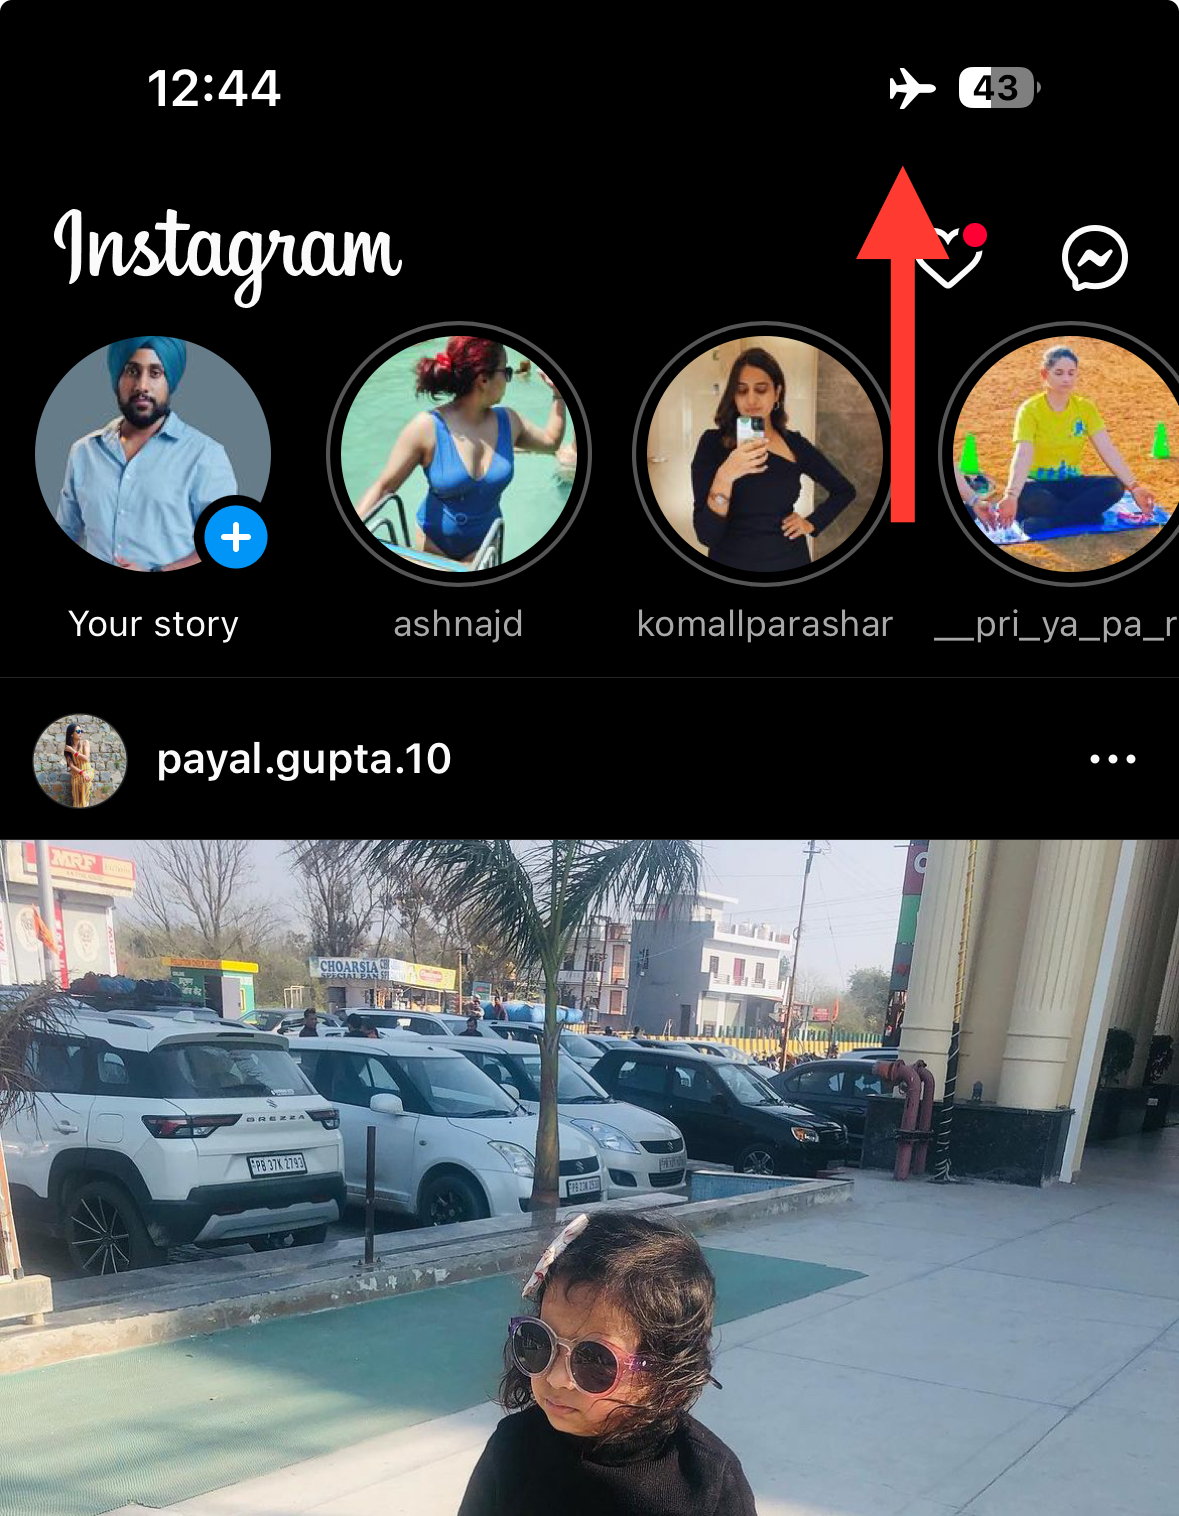 How to view Instagram stories without them knowing (5 Options) 1